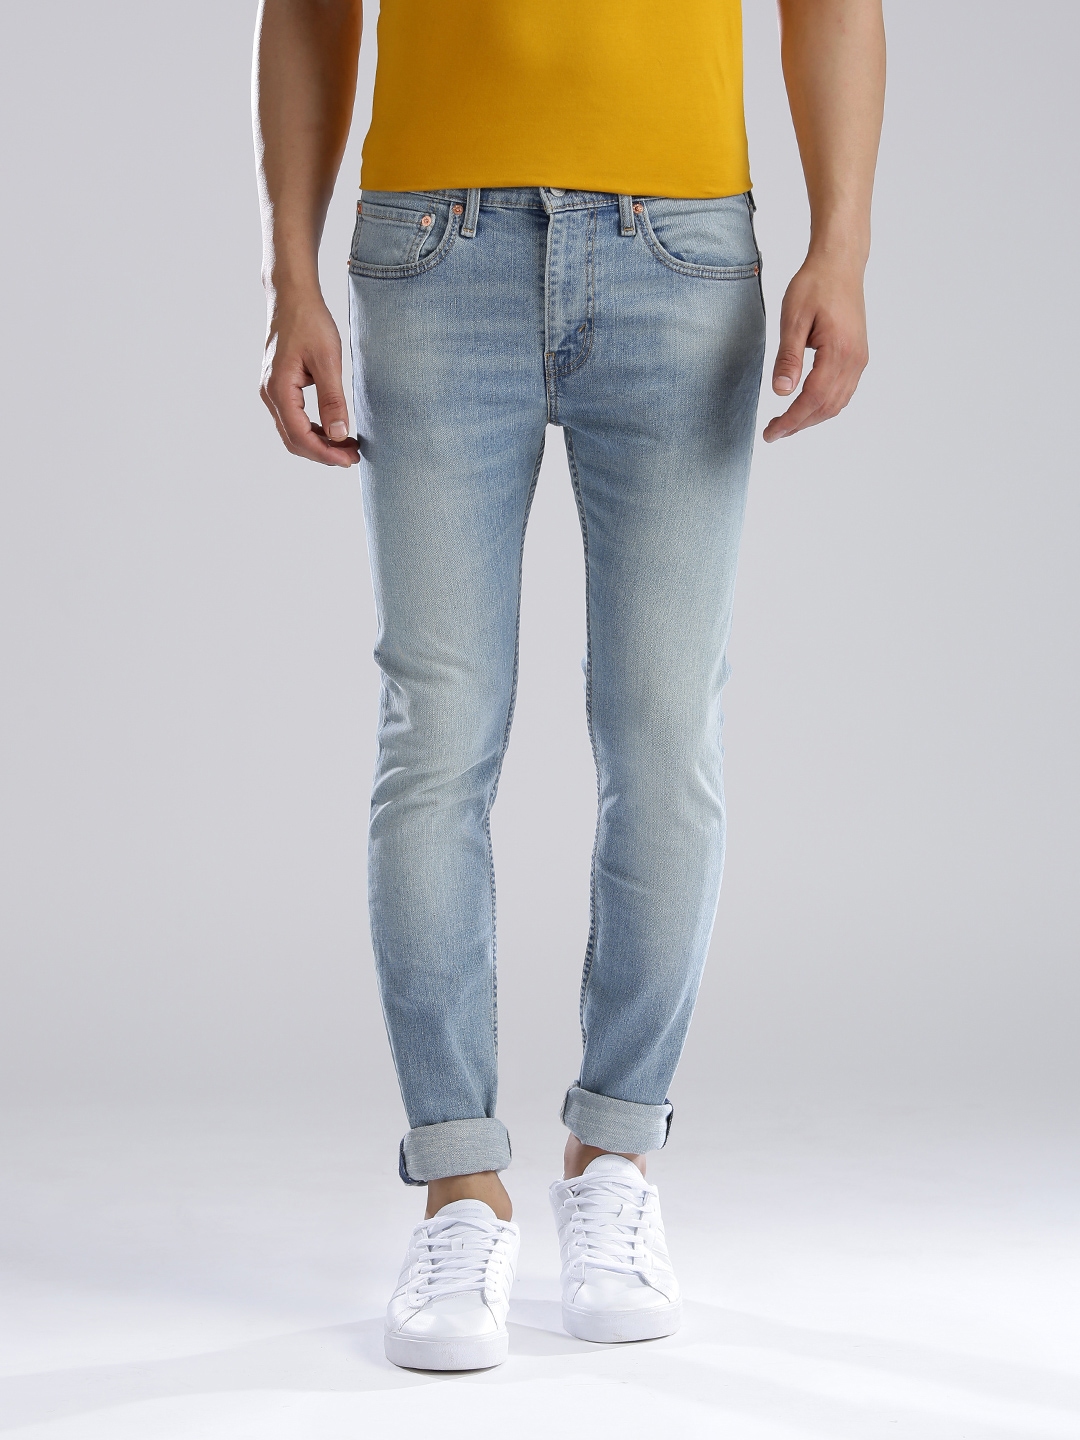 Buy Levi's Blue 519 Super Skinny Fit Low Rise Jeans - Jeans for Men 1424081  | Myntra